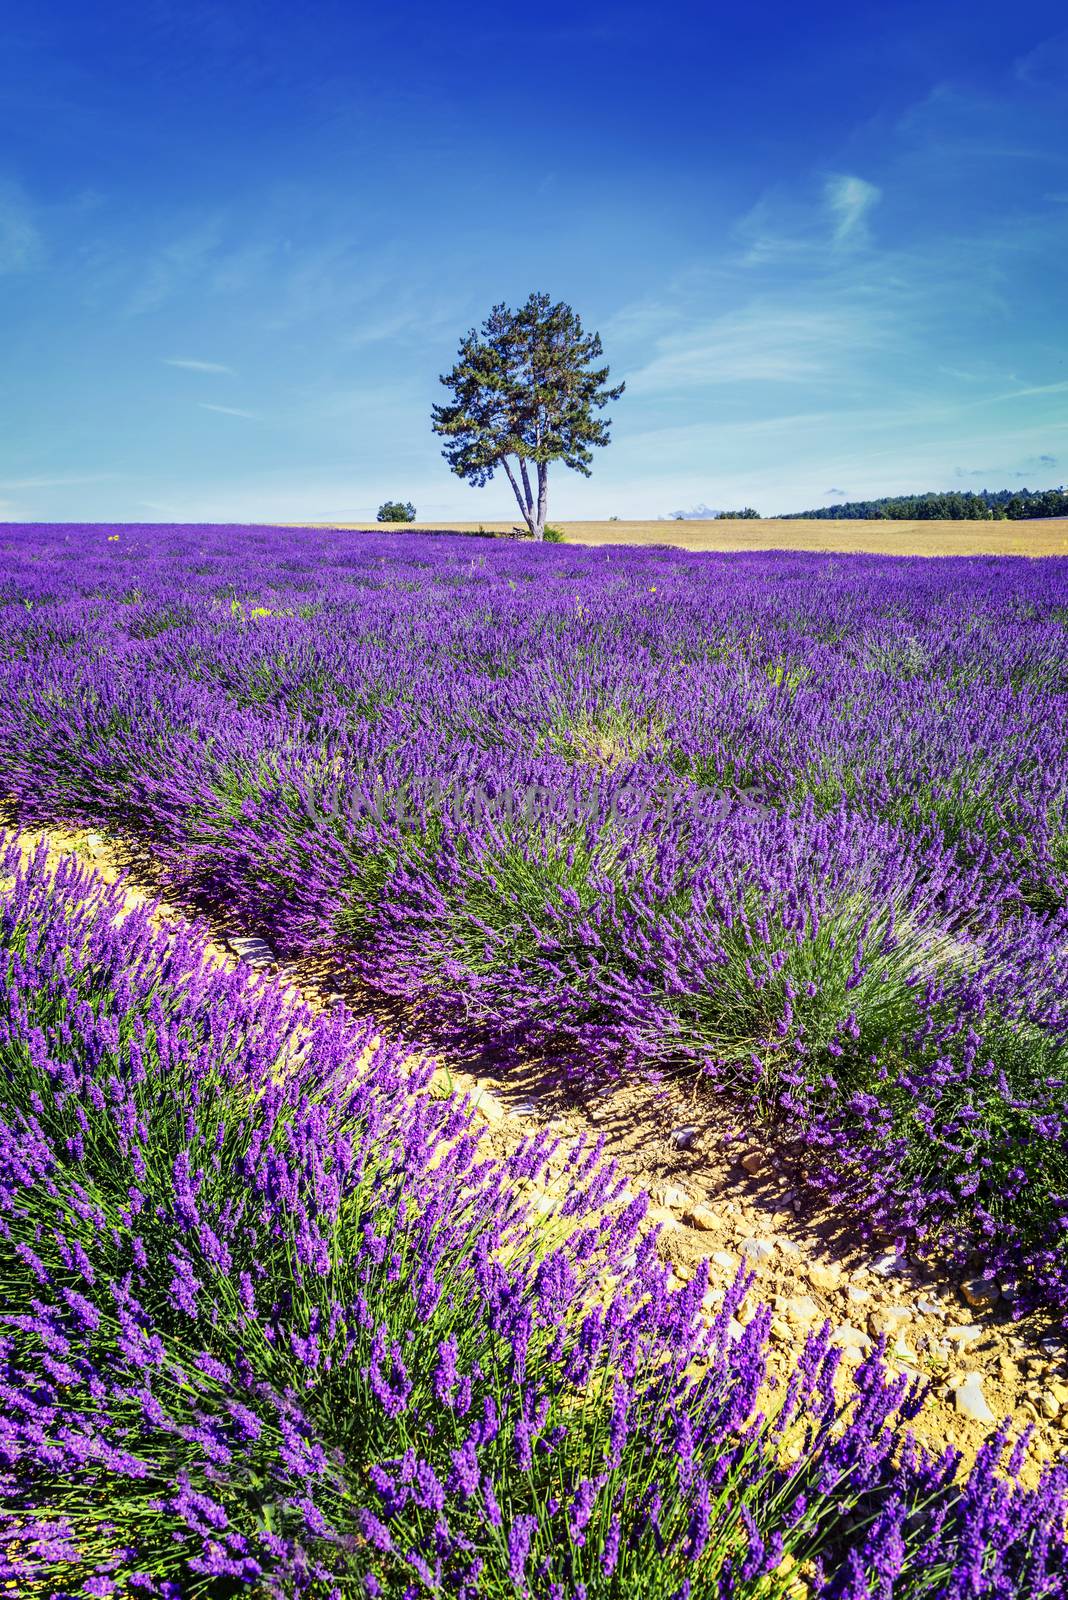 LAVENDER IN SOUTH OF FRANCE by ventdusud